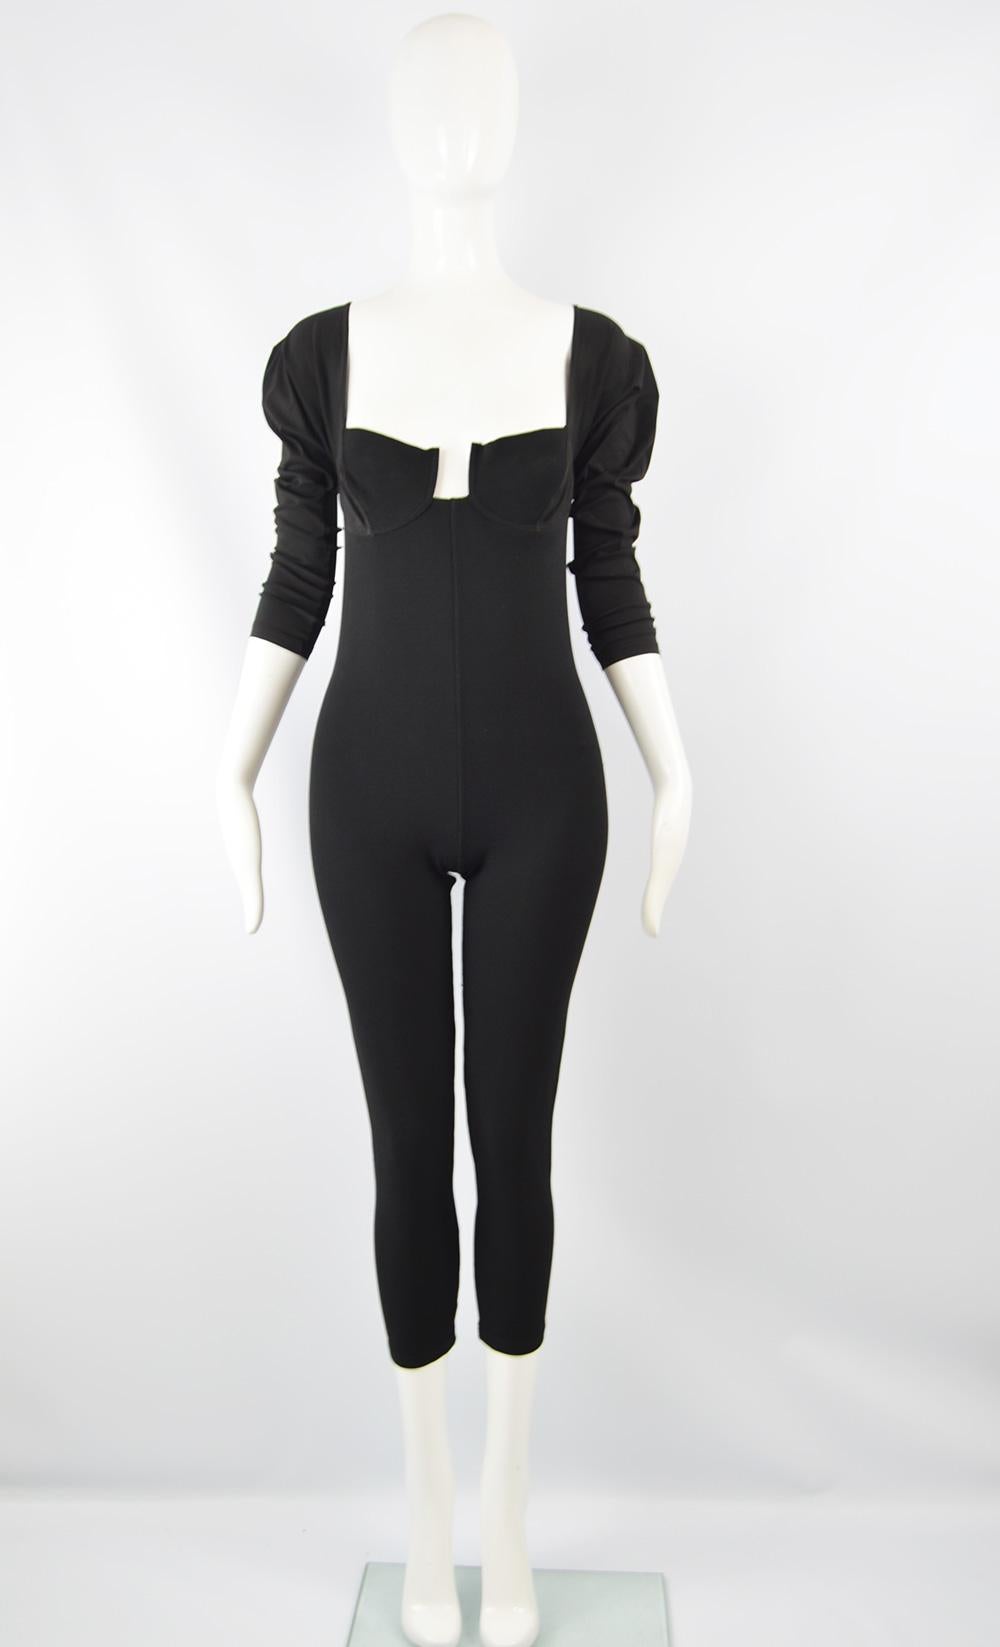 Size: Marked M. 
Bust - Stretches up to 36” / 91cm
Waist - up to 30” / 76cm
Hips - Up to 38” / 96cm
Inside Leg - 23” / 58cm
Length (Bust to Hem) - 37” / 94cm 

A stunning vintage women's jumpsuit from the 90s by quality Parisian label, Andrea